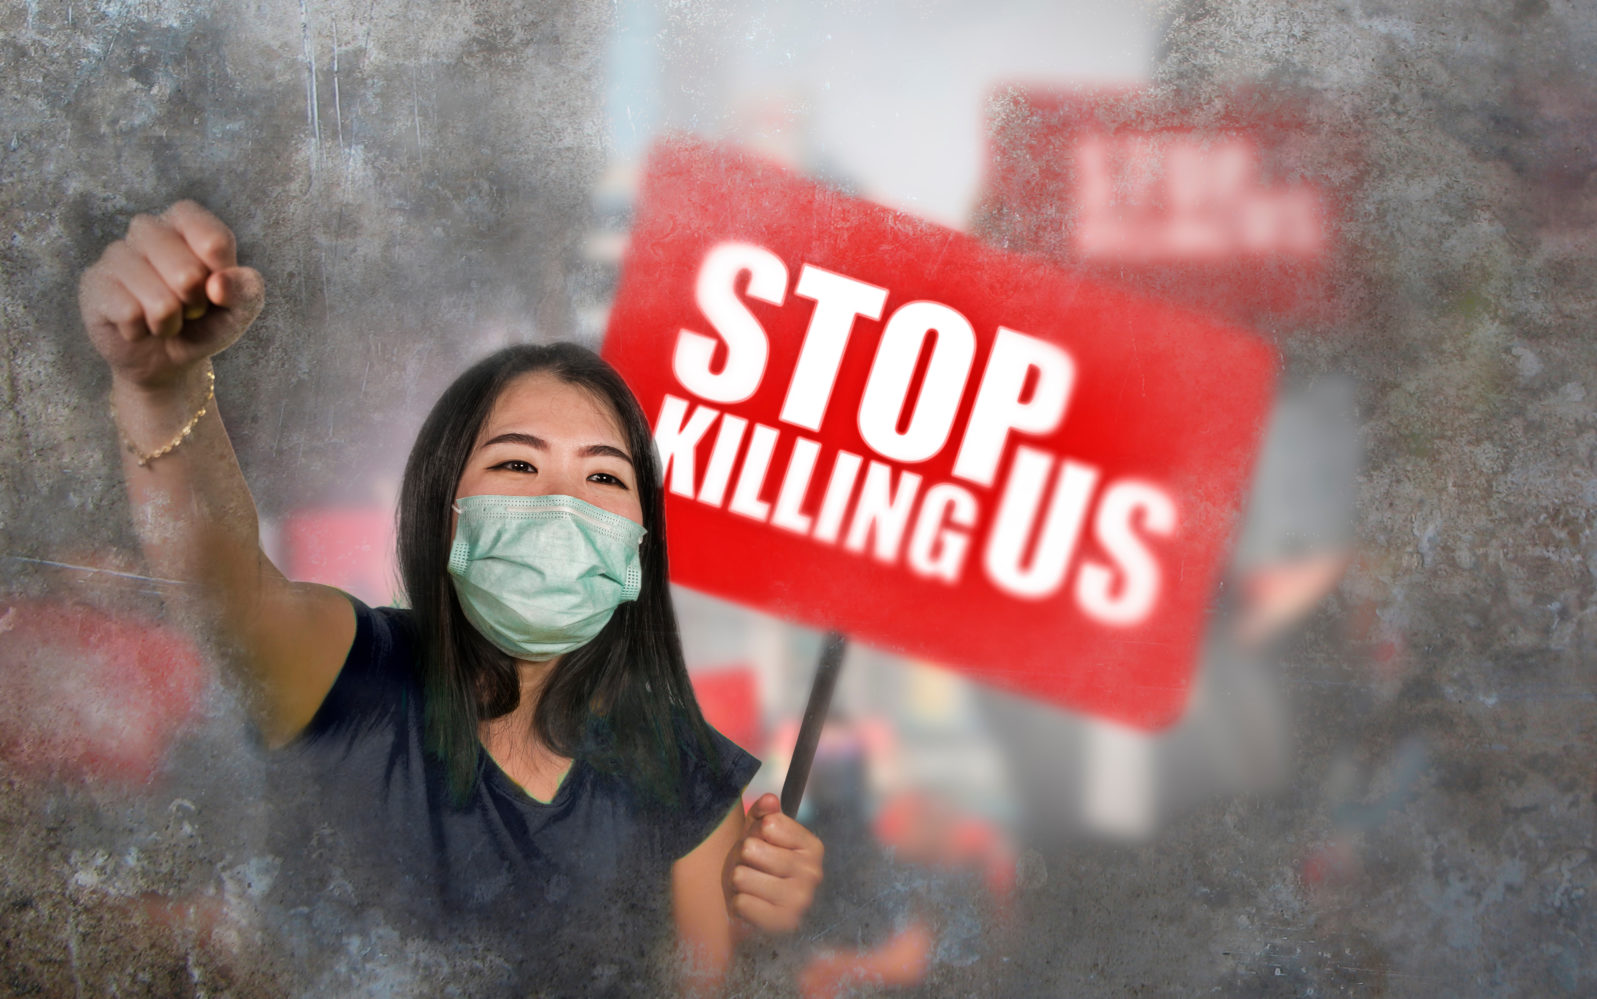 pacifist Asian woman angry and outraged protesting on street demonstration against China abuse standing for freedom and human rights holding Stop Killing Us billboard